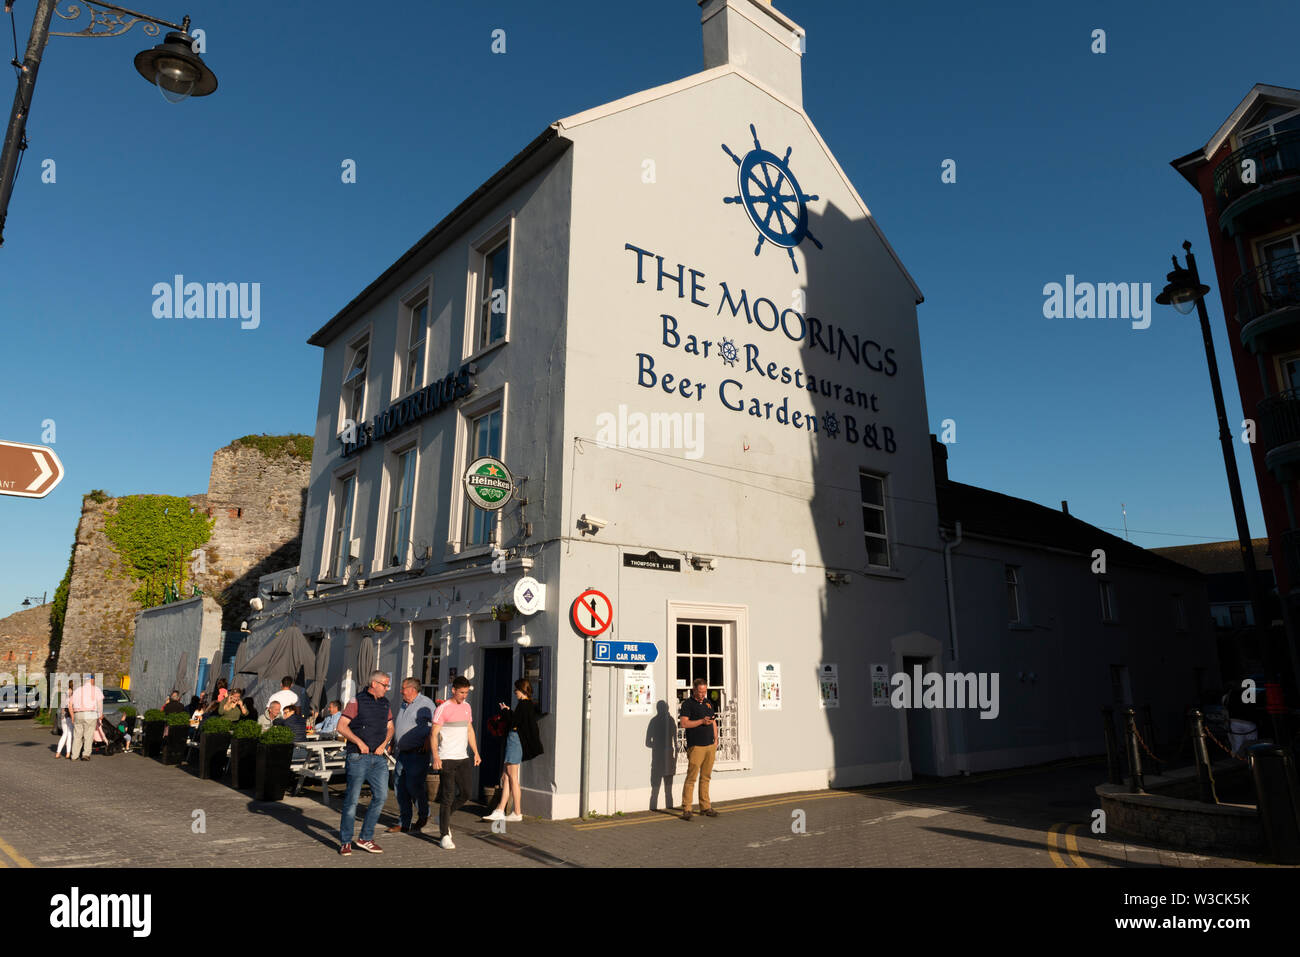 People enjoying the late afternoon at The Moorings Bar and Restaurant in Dungarvan Ireland. The place is the most popular spot for the locals. Stock Photo